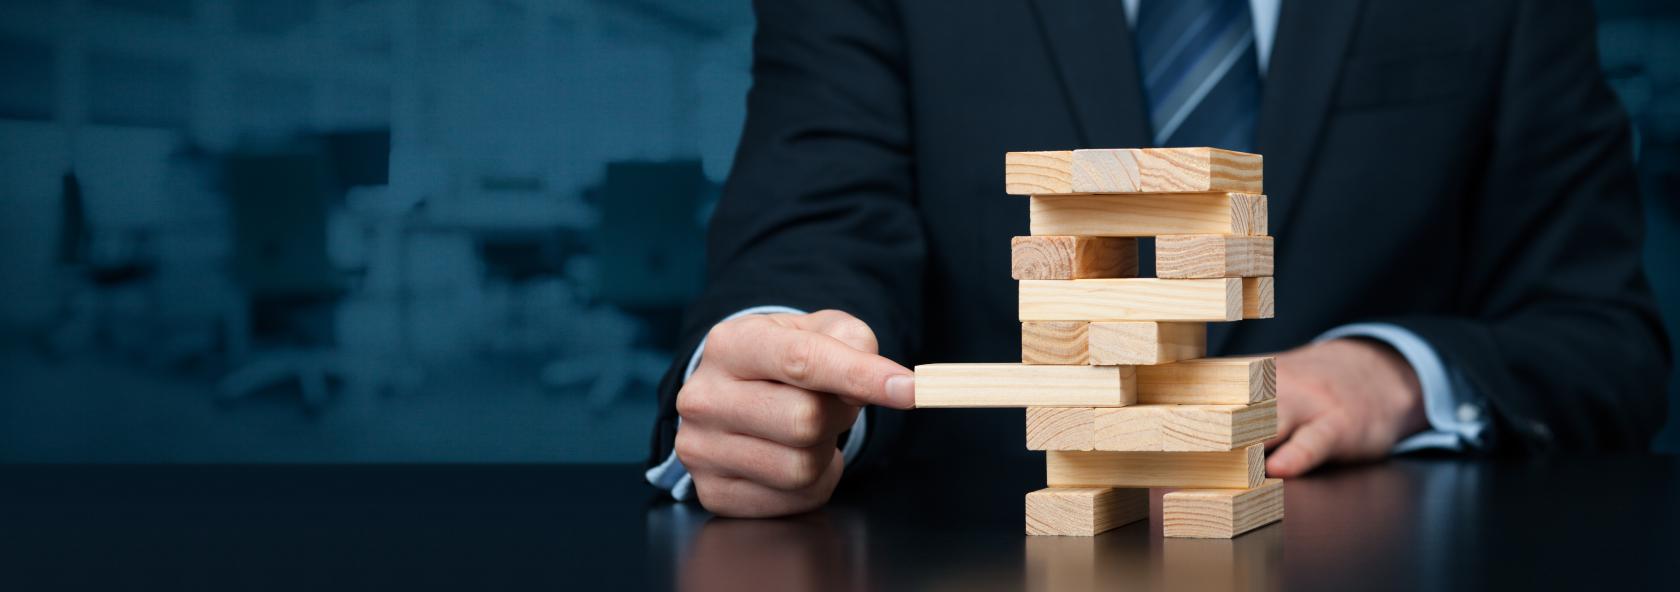 Man wearing a suit playing the wooden block game Jenga